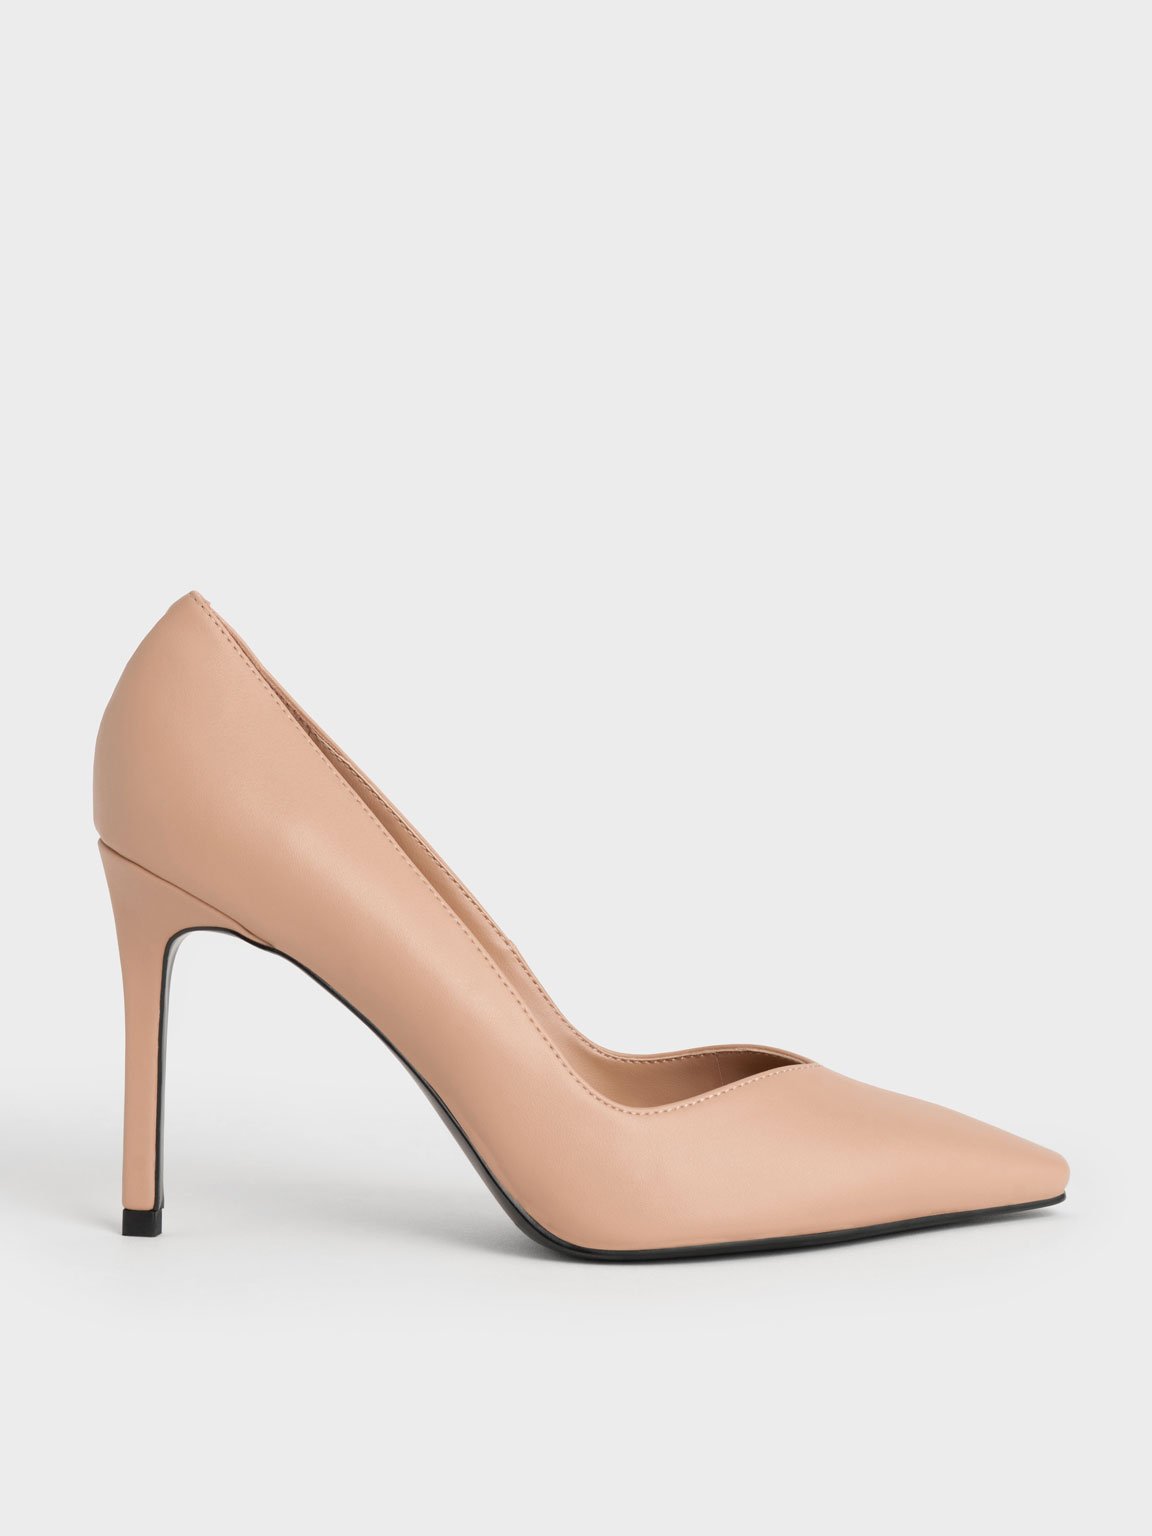 Tapered Square-Toe Pumps